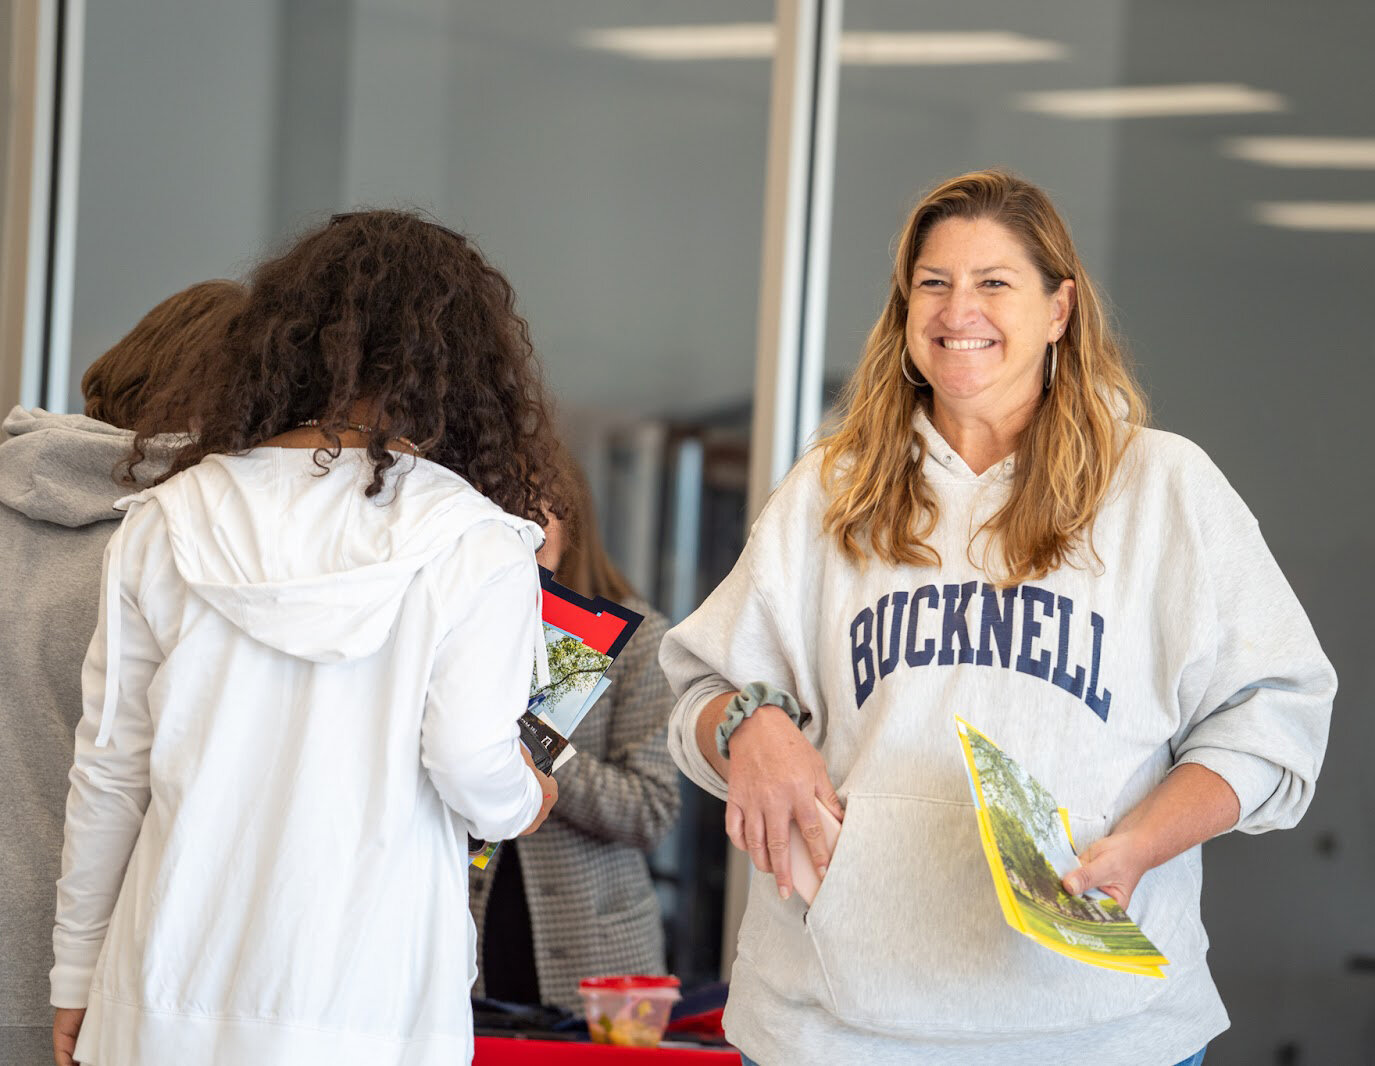 Delmarva Christian High School Counselor Terri Smith welcomes students to the Arts and Athletic Center of Delmarva Christian High School during College Week.